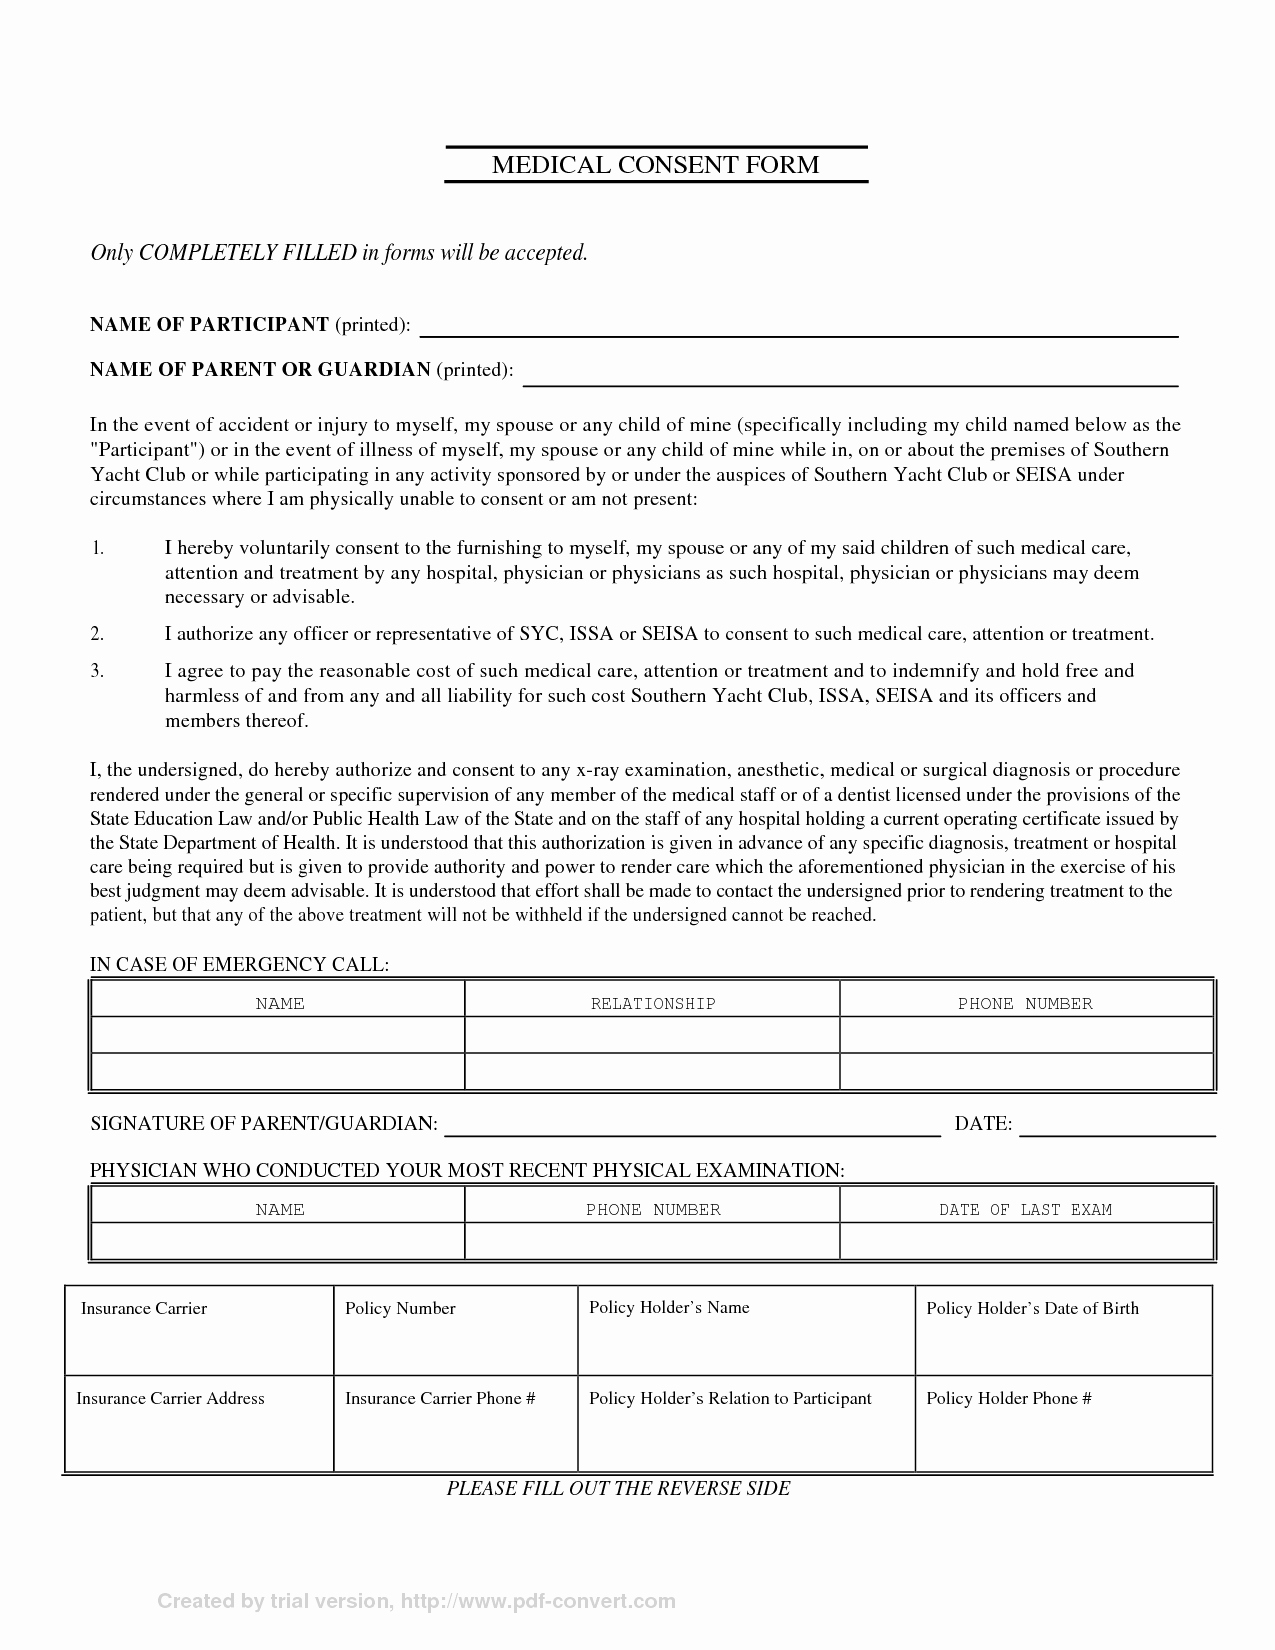 Parental Consent forms Template Awesome Parental Medical Consent form Template Free Printable